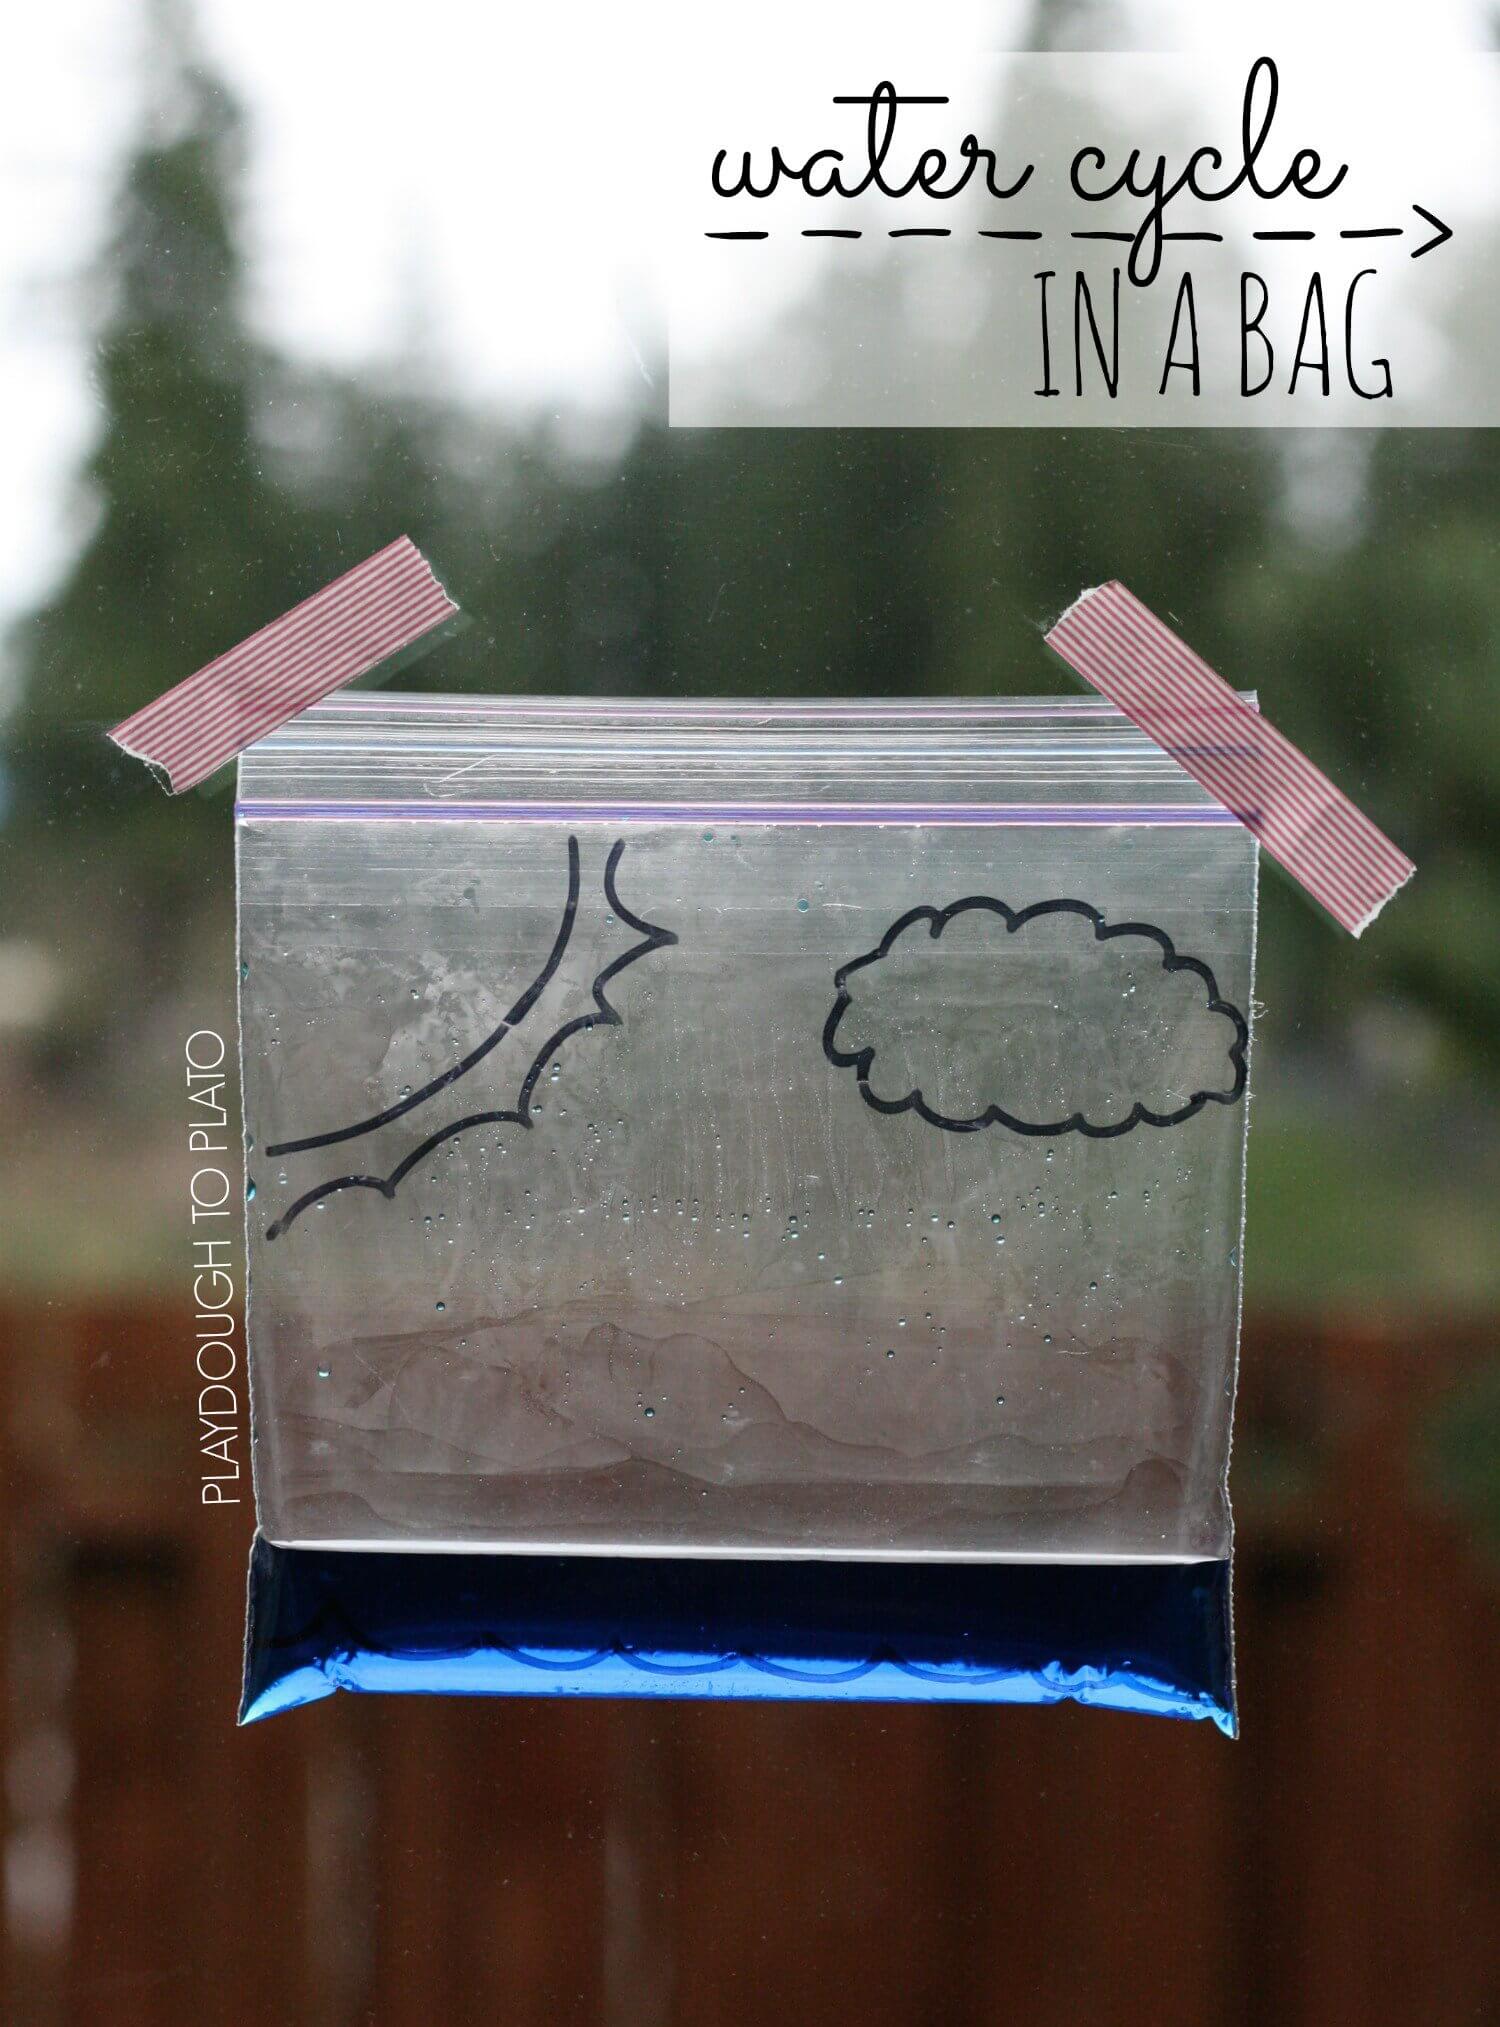 Weather Activity Pack - The Stem Laboratory